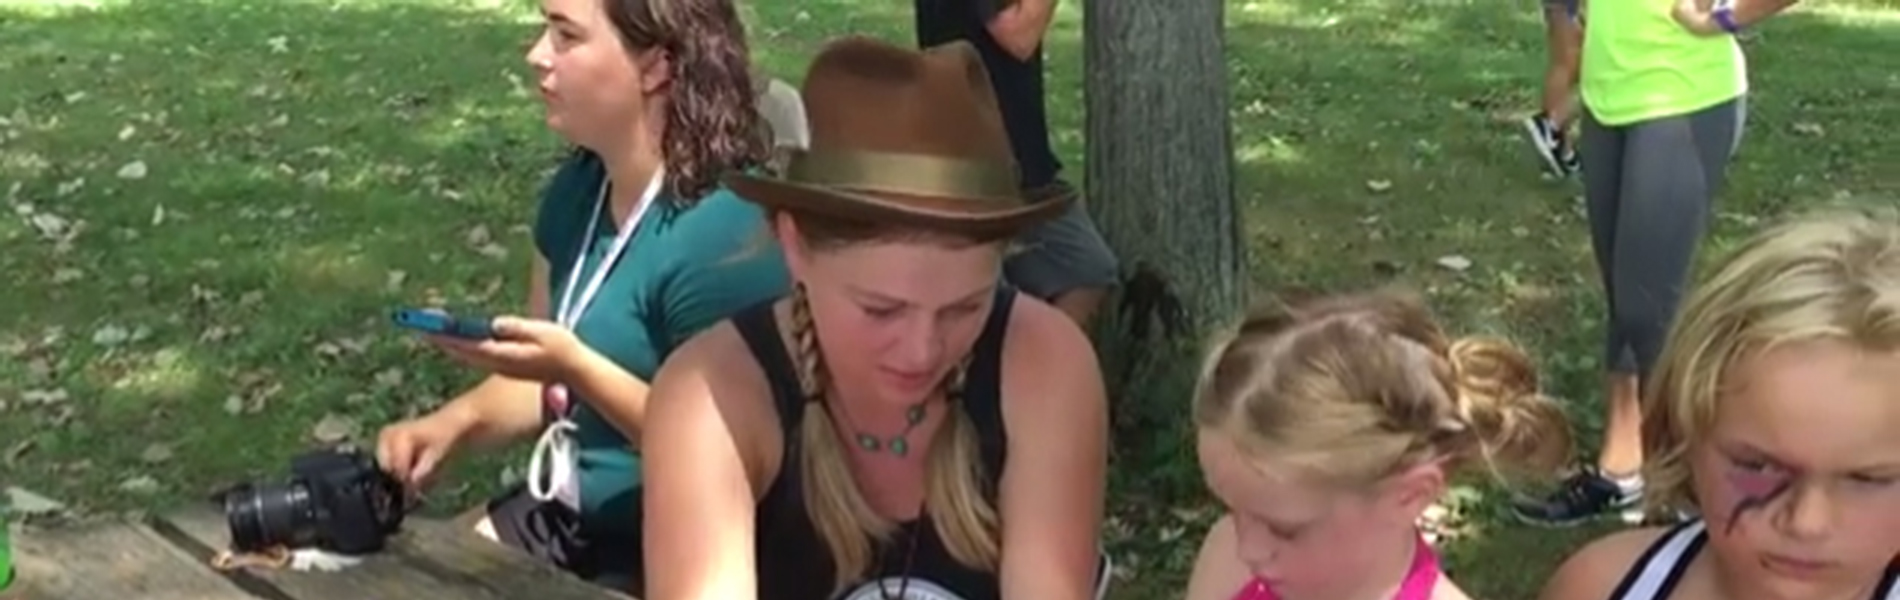 Crystal Bowersox - Day in the Life